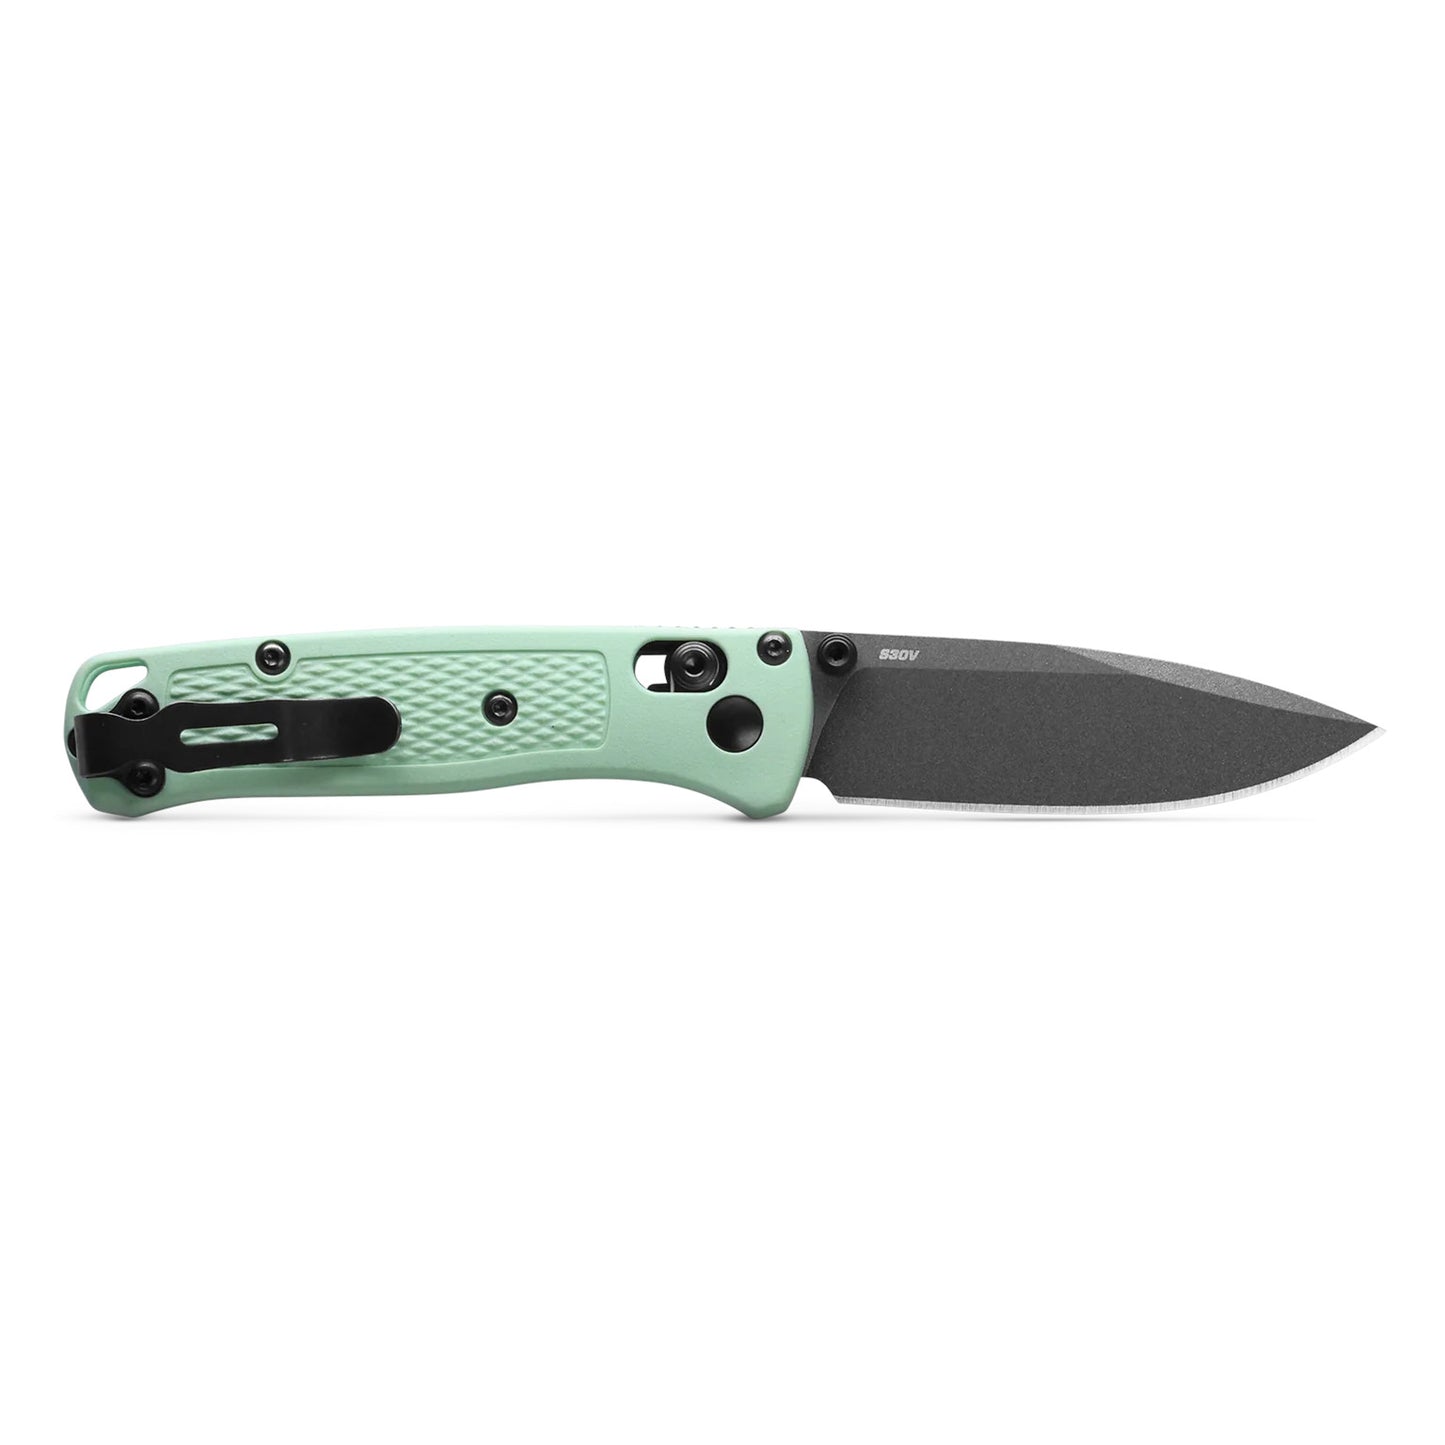 Benchmade 533GY-06 Mini Bugout 2.82" Tungsten Gray CPM-S30V Folding Knife with Sea Foam Handle